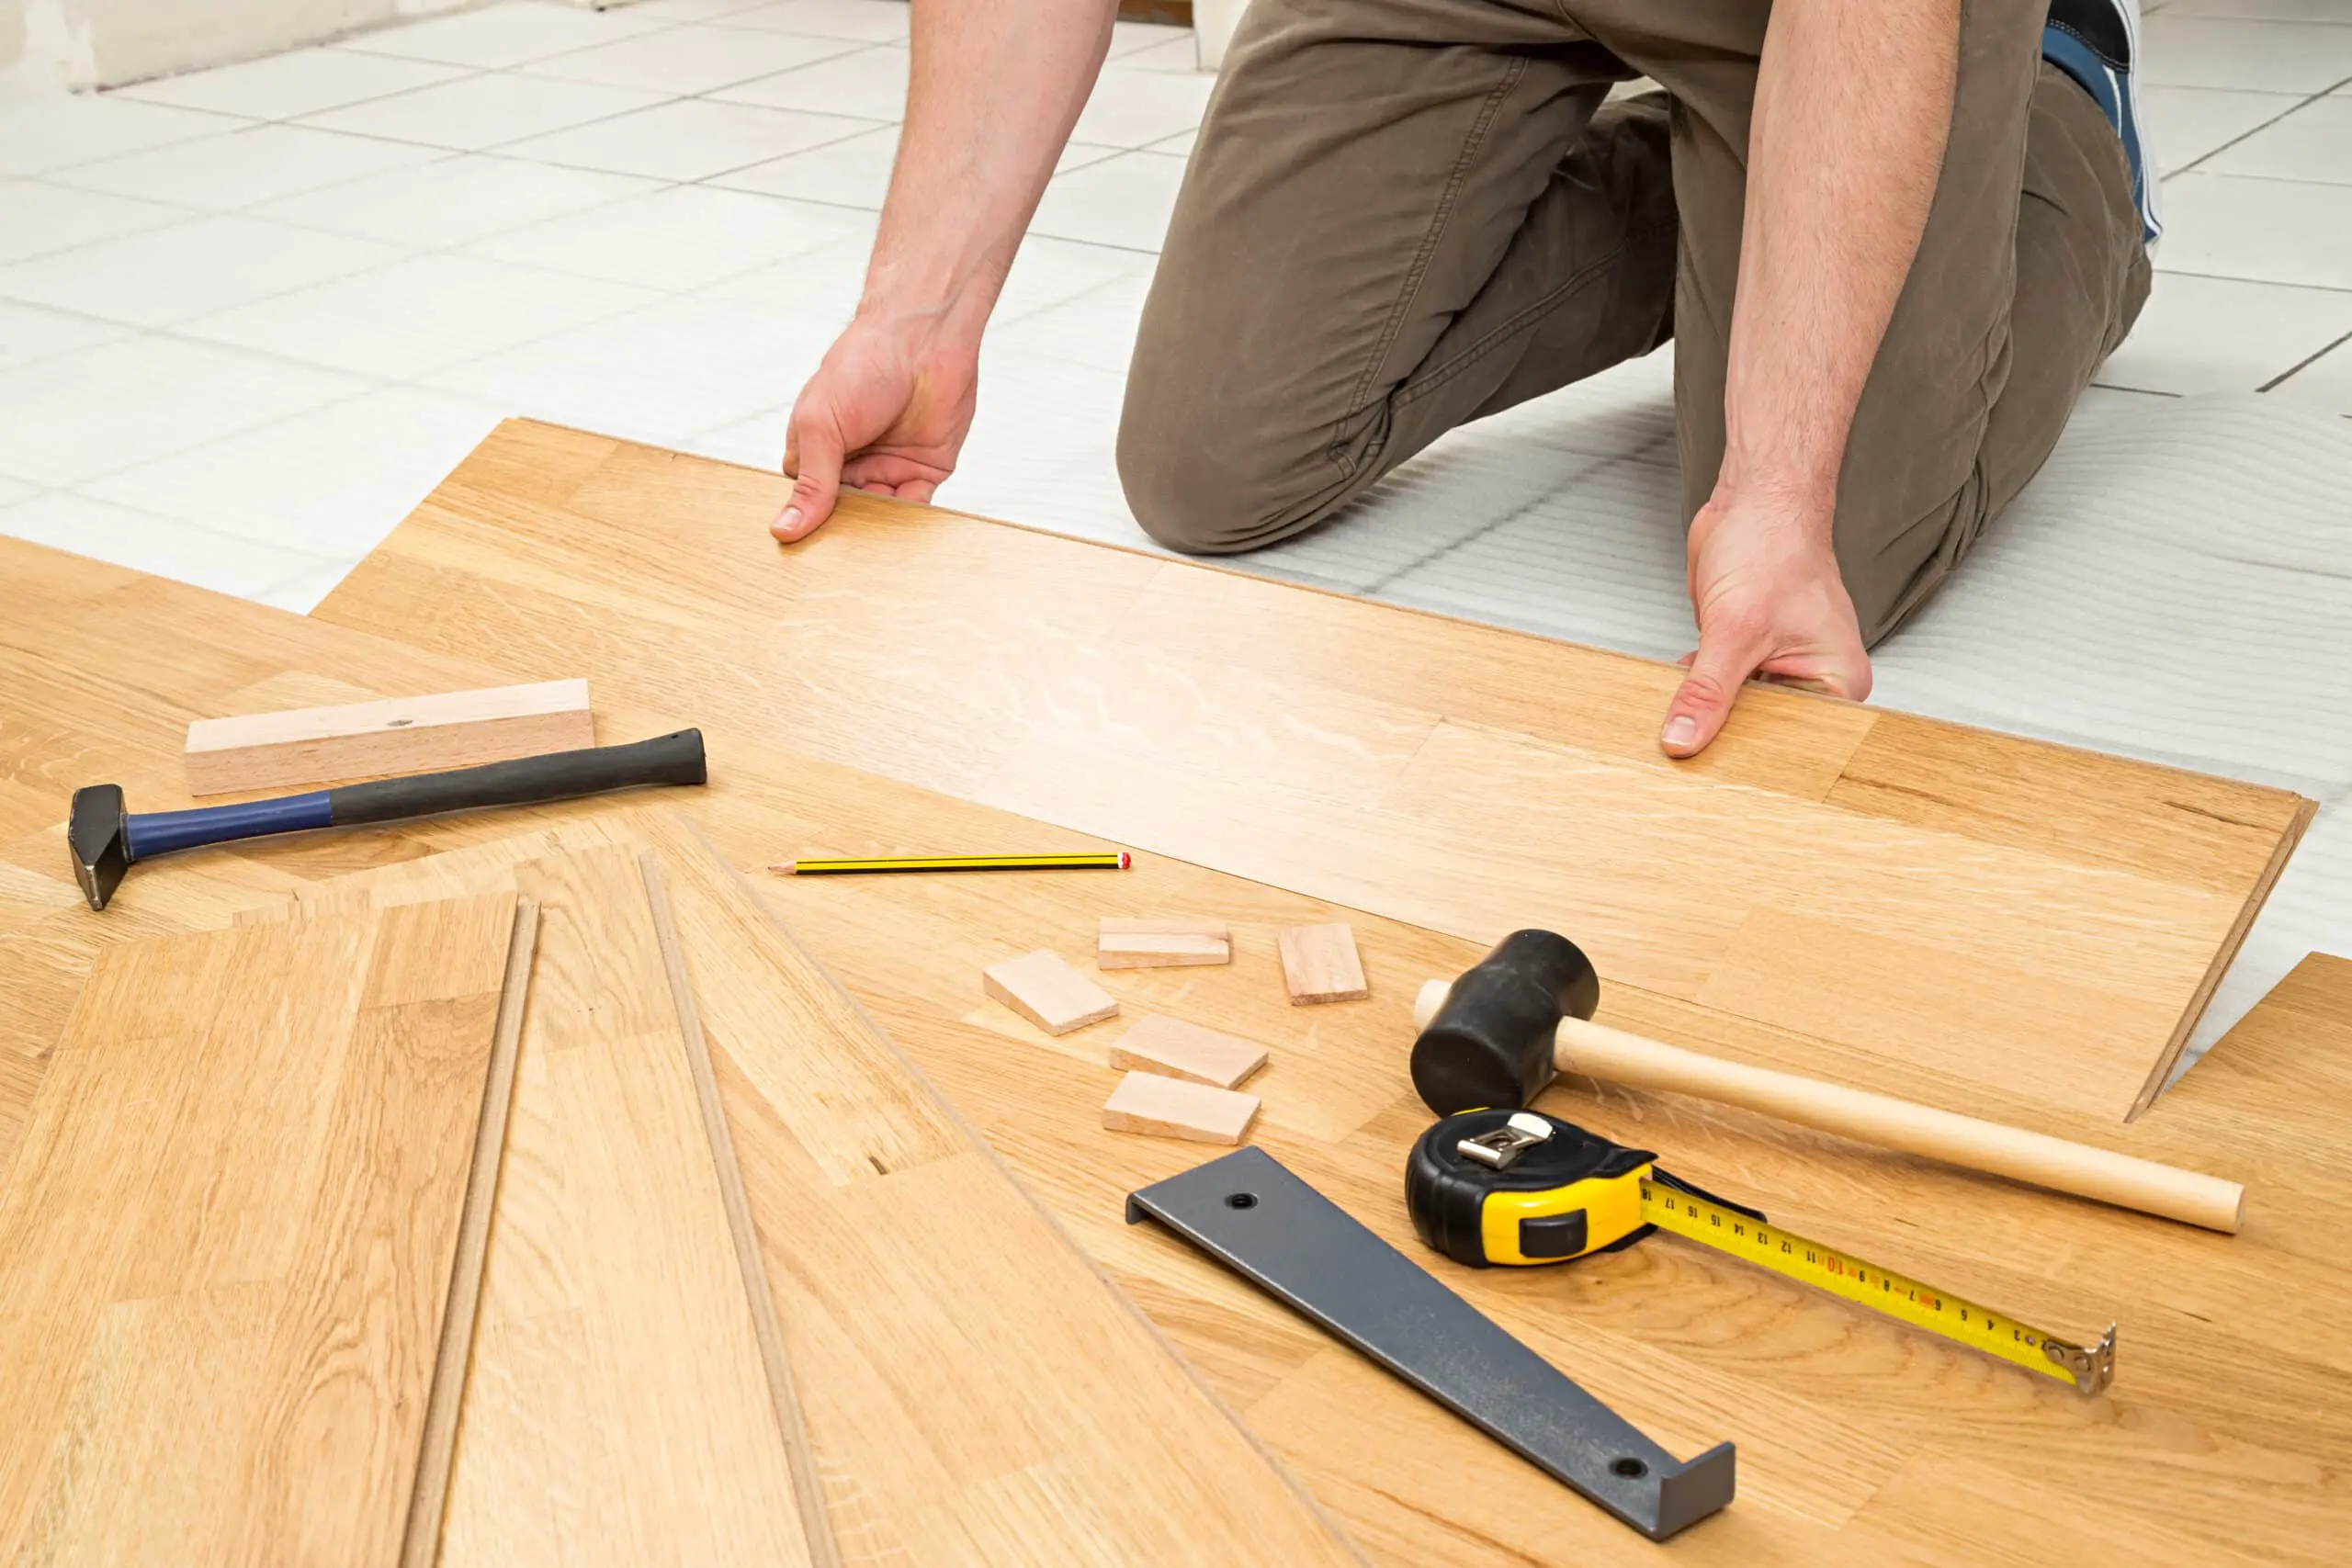 How To Stop Wood Floors From Squeaking